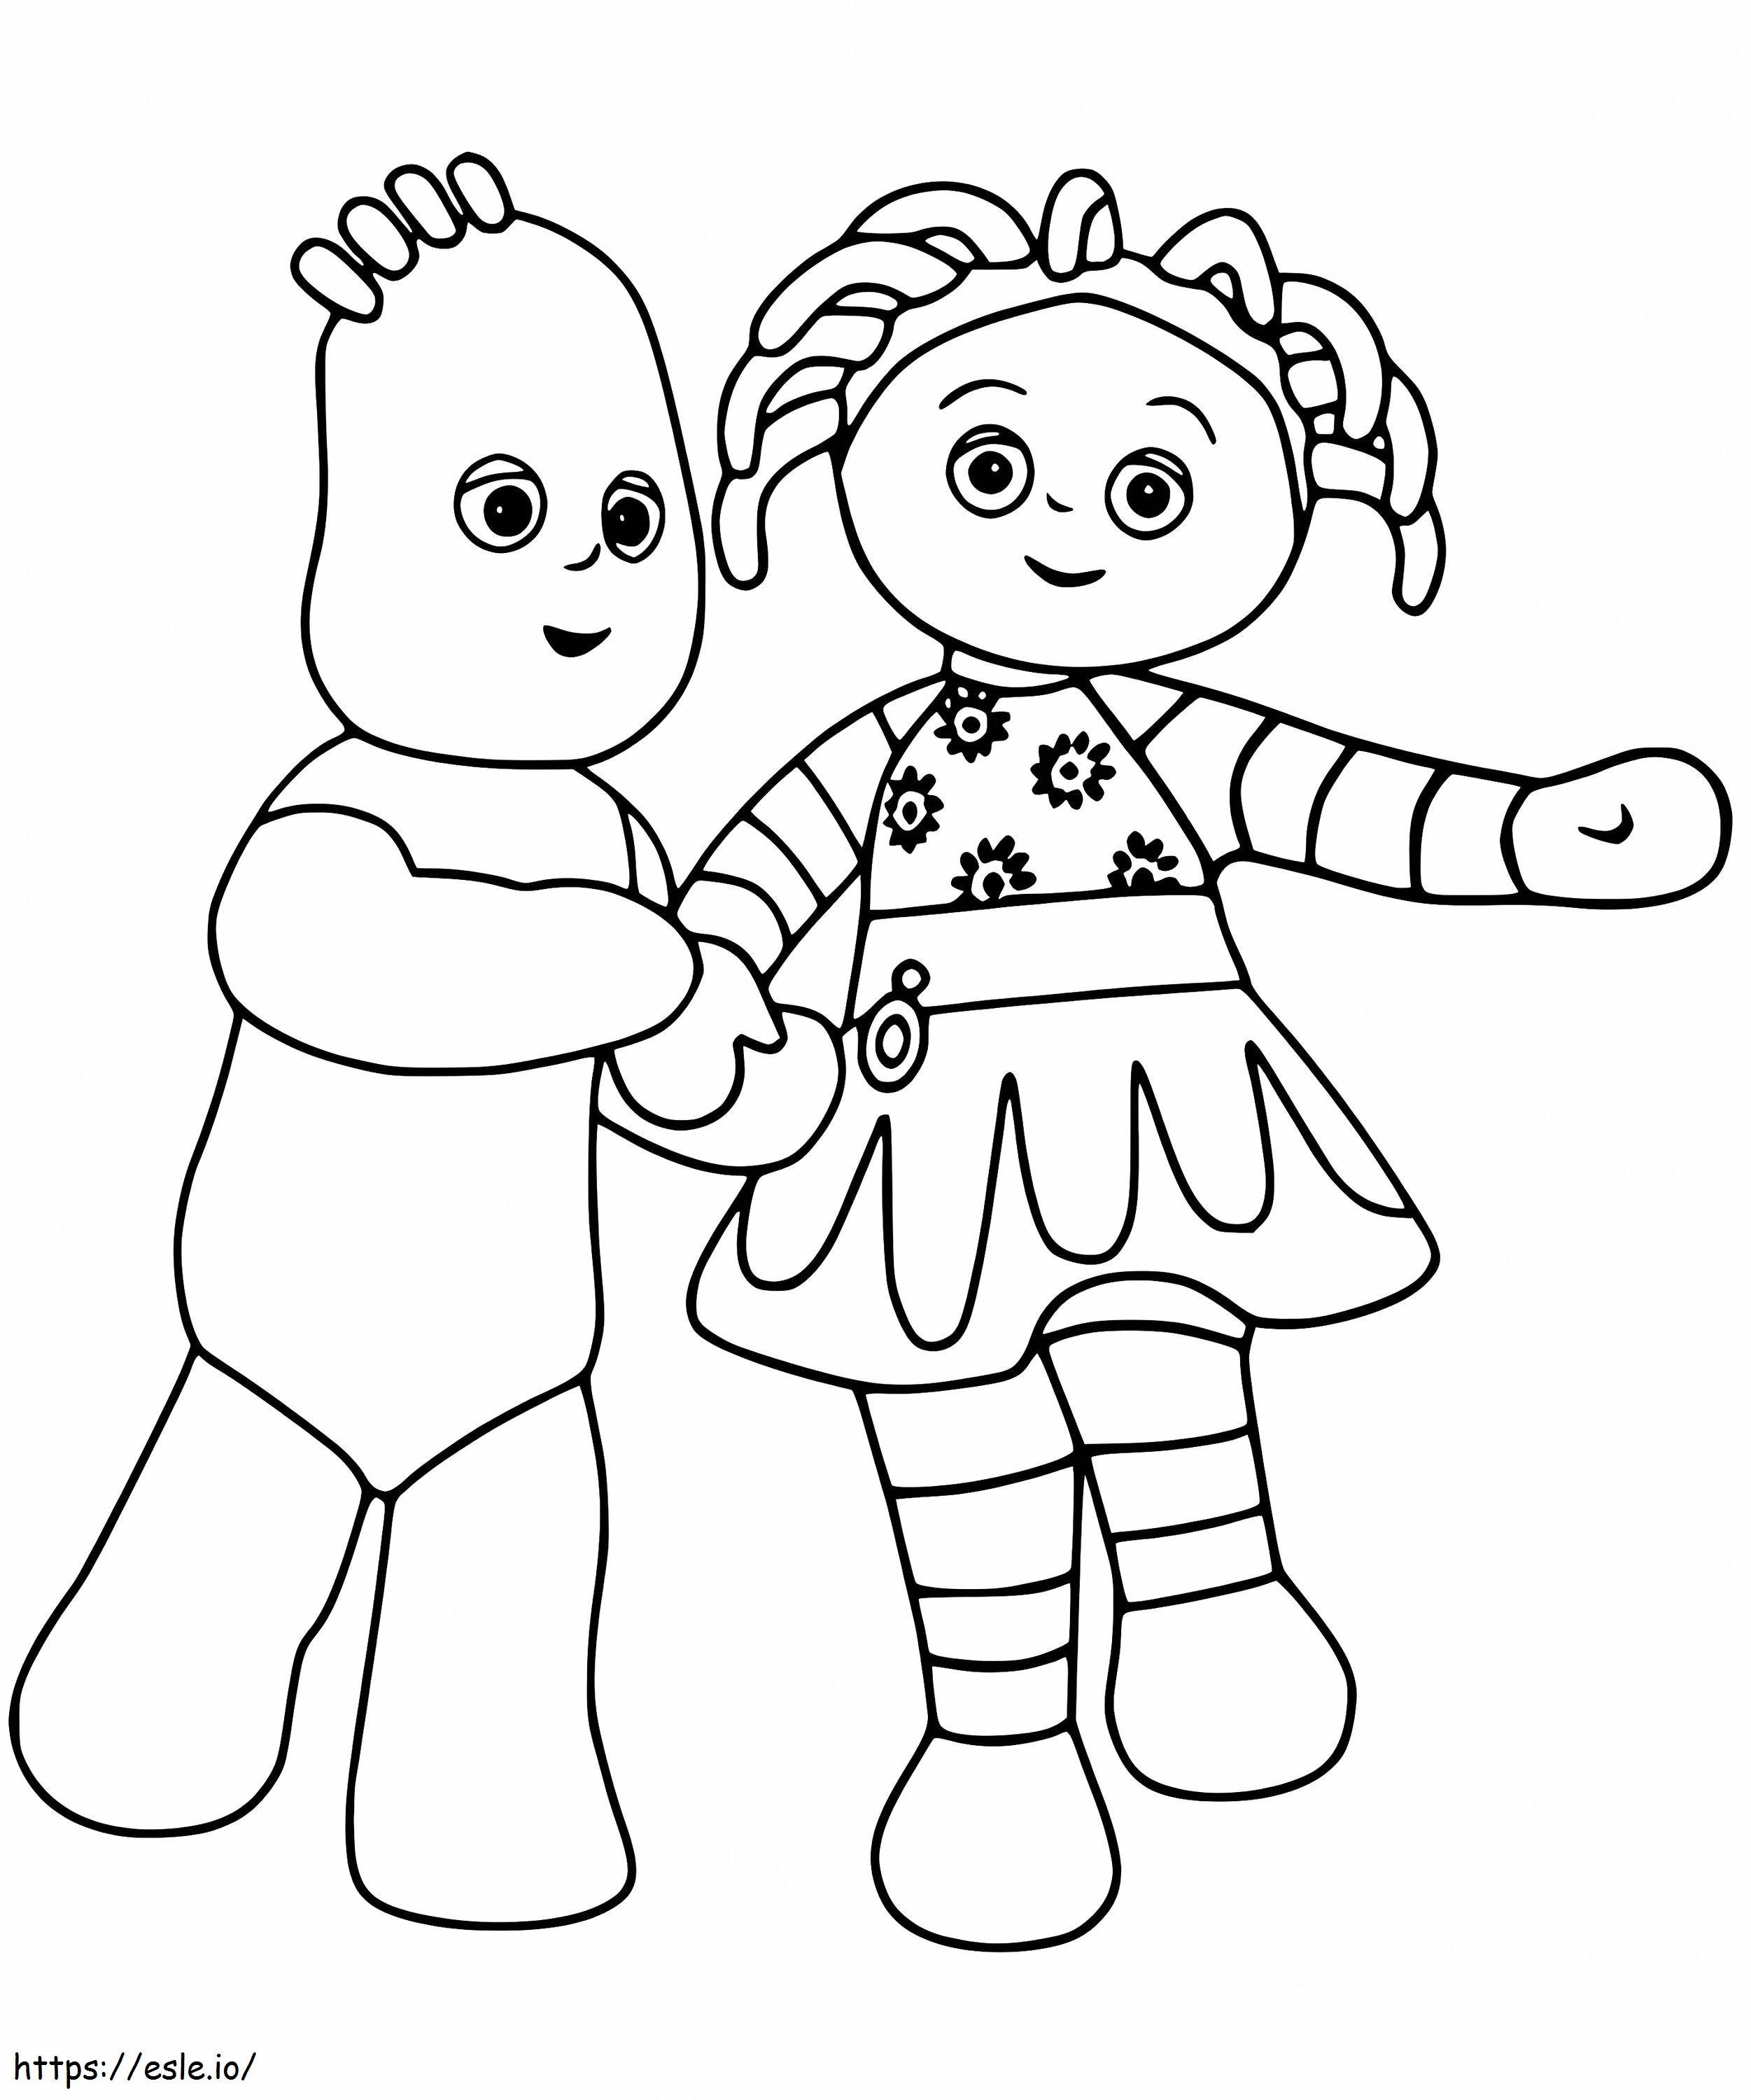 Hmjqi81 In The Night Garden coloring page